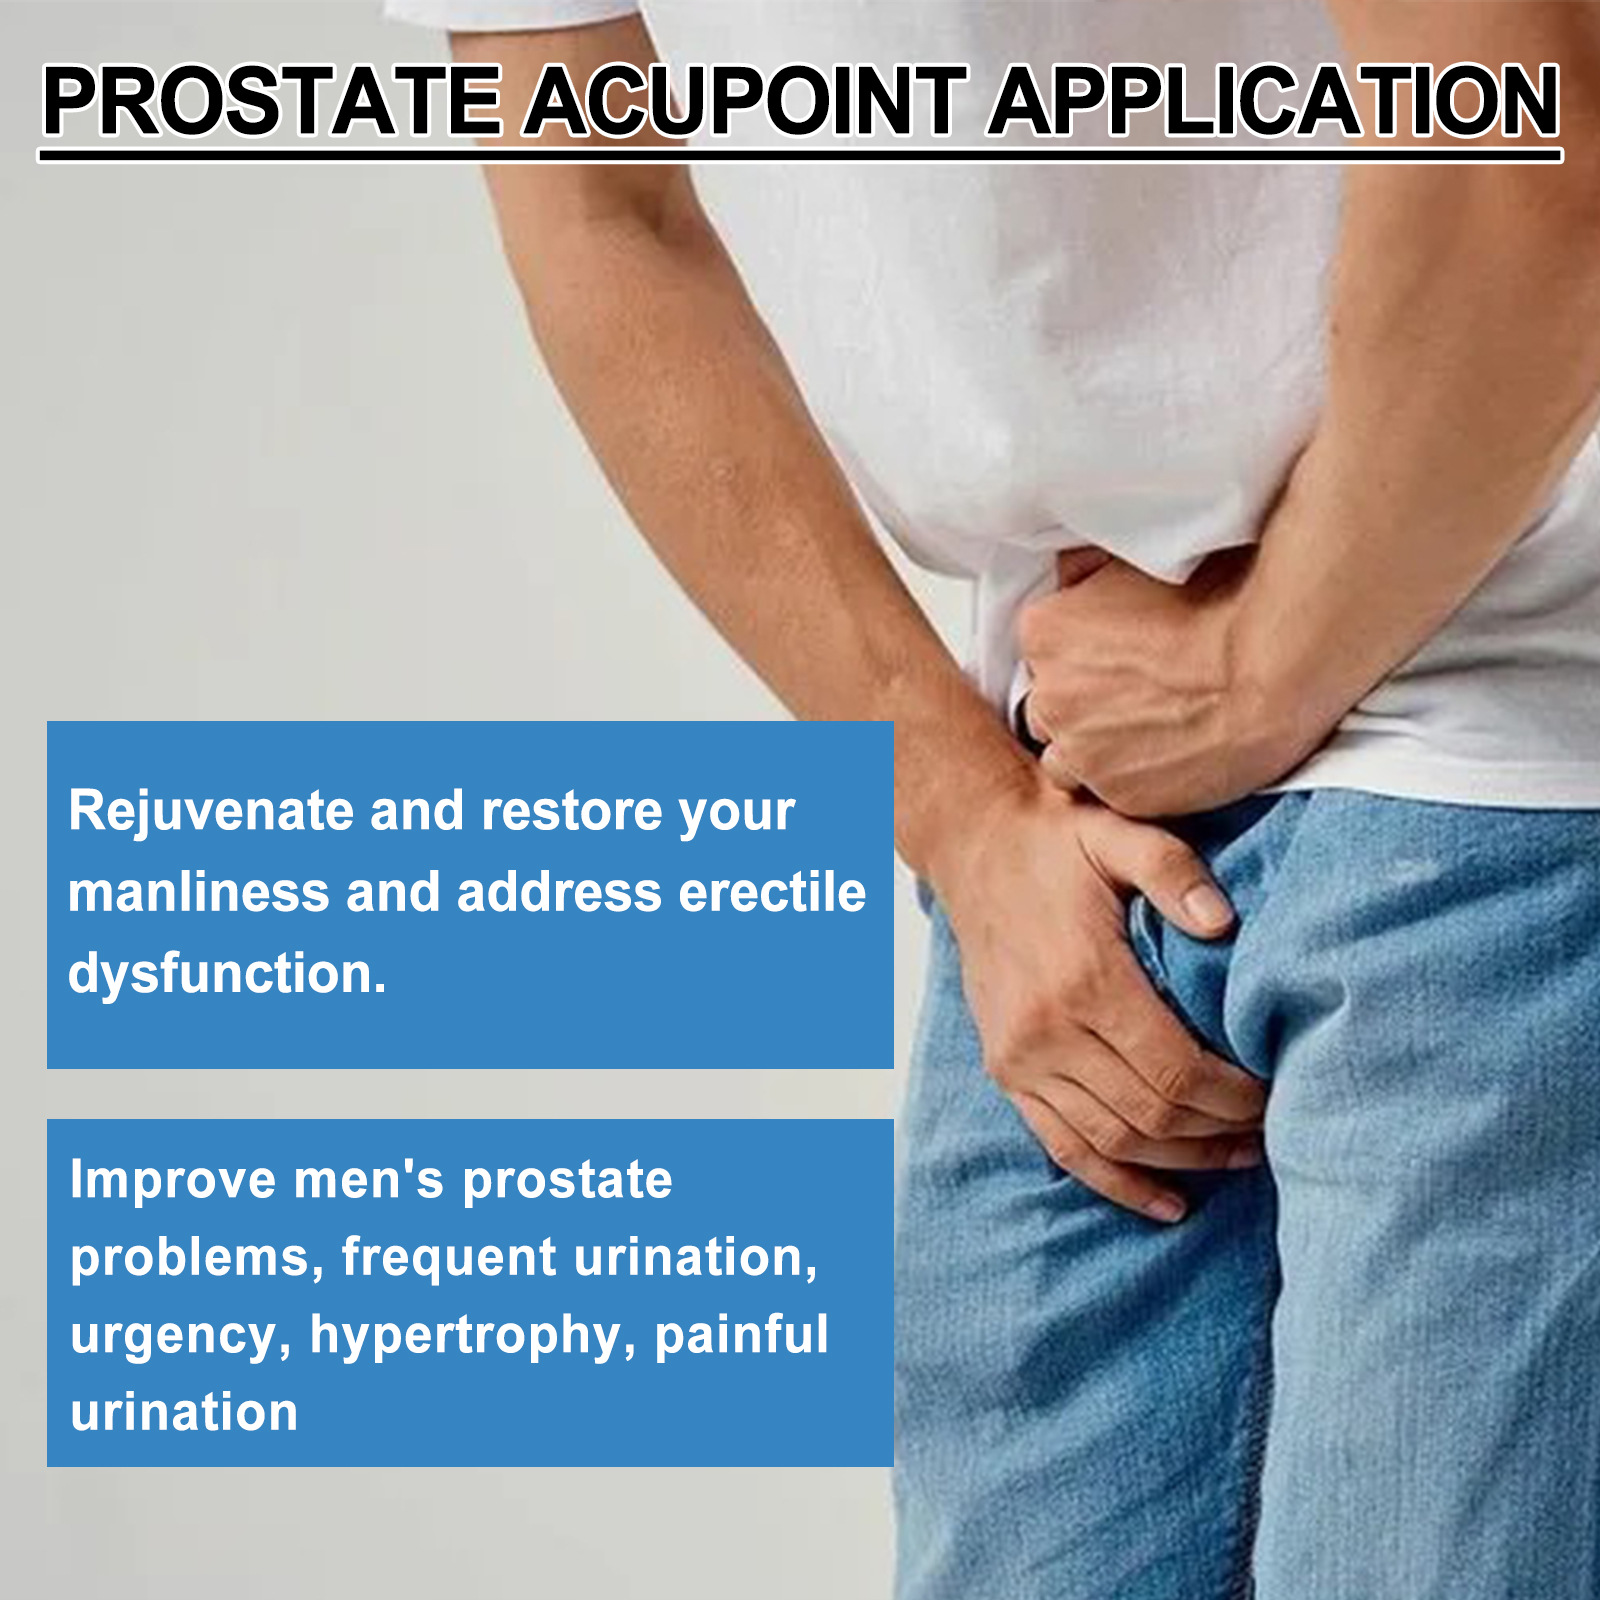 South Moon Prostate Acupuncture Point Application Body Nursing Adhesive Bandage